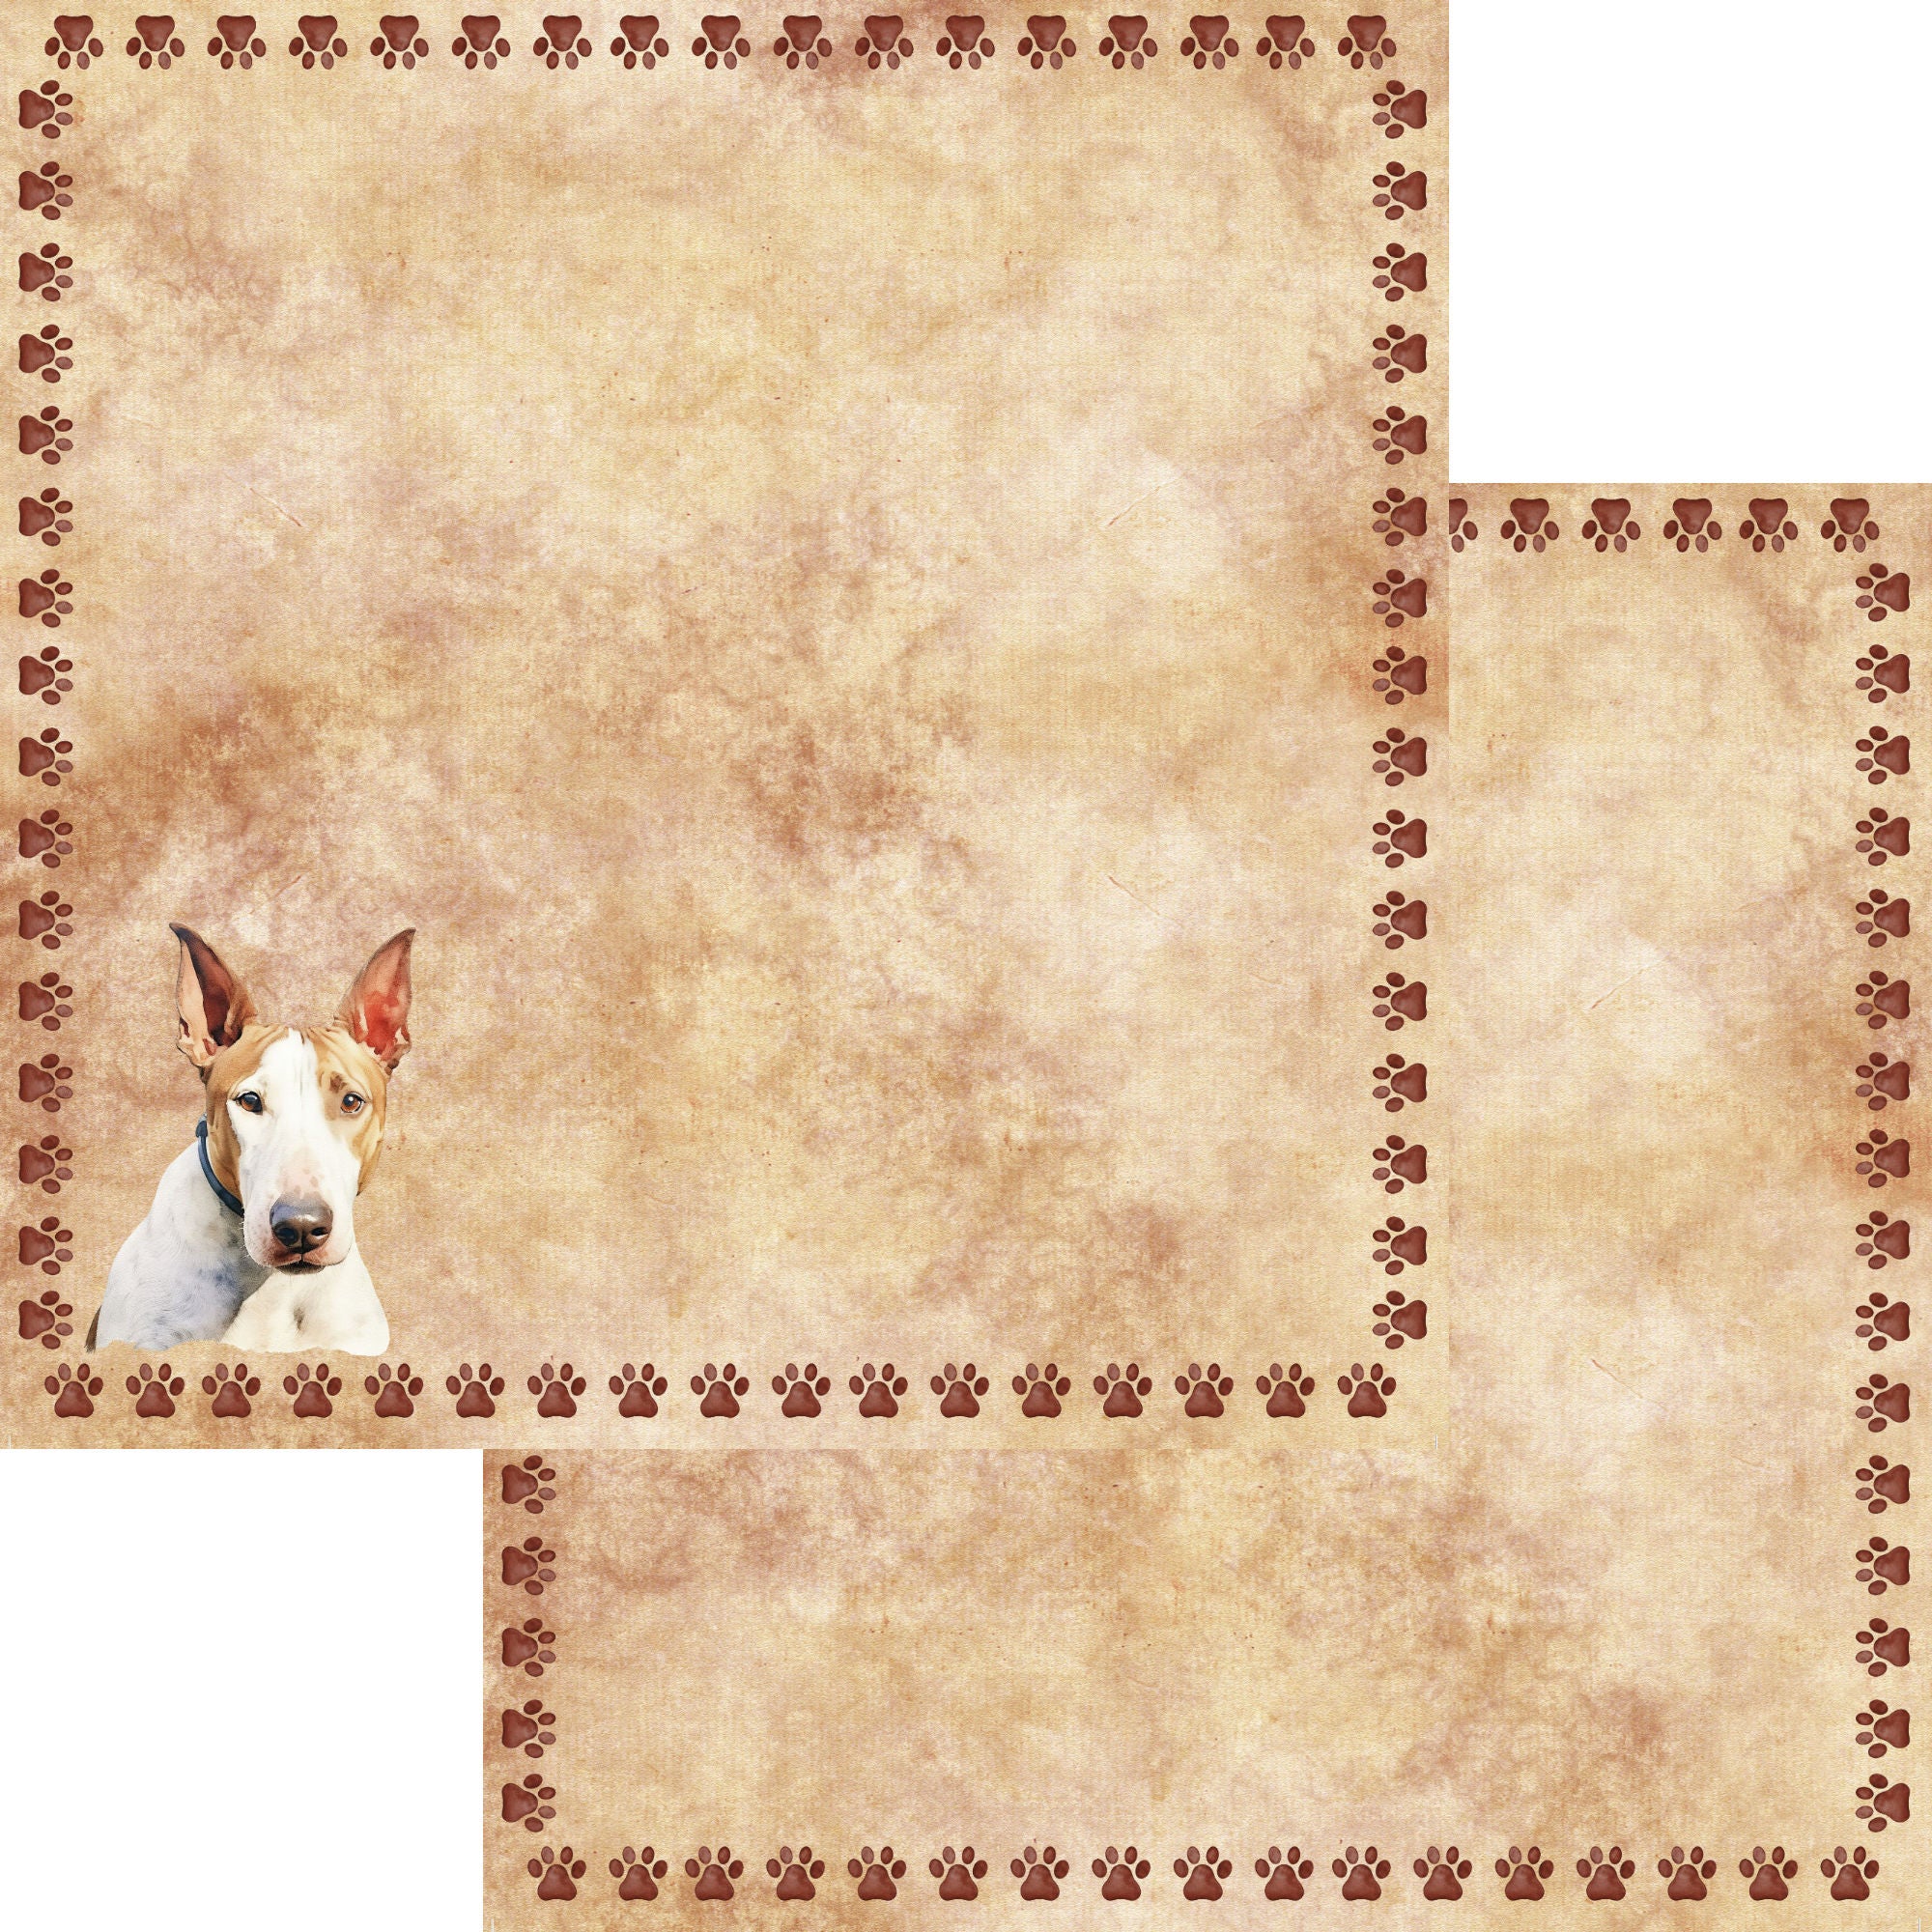 Dog Breeds Collection Bull Terrier 12 x 12 Double-Sided Scrapbook Paper by SSC Designs